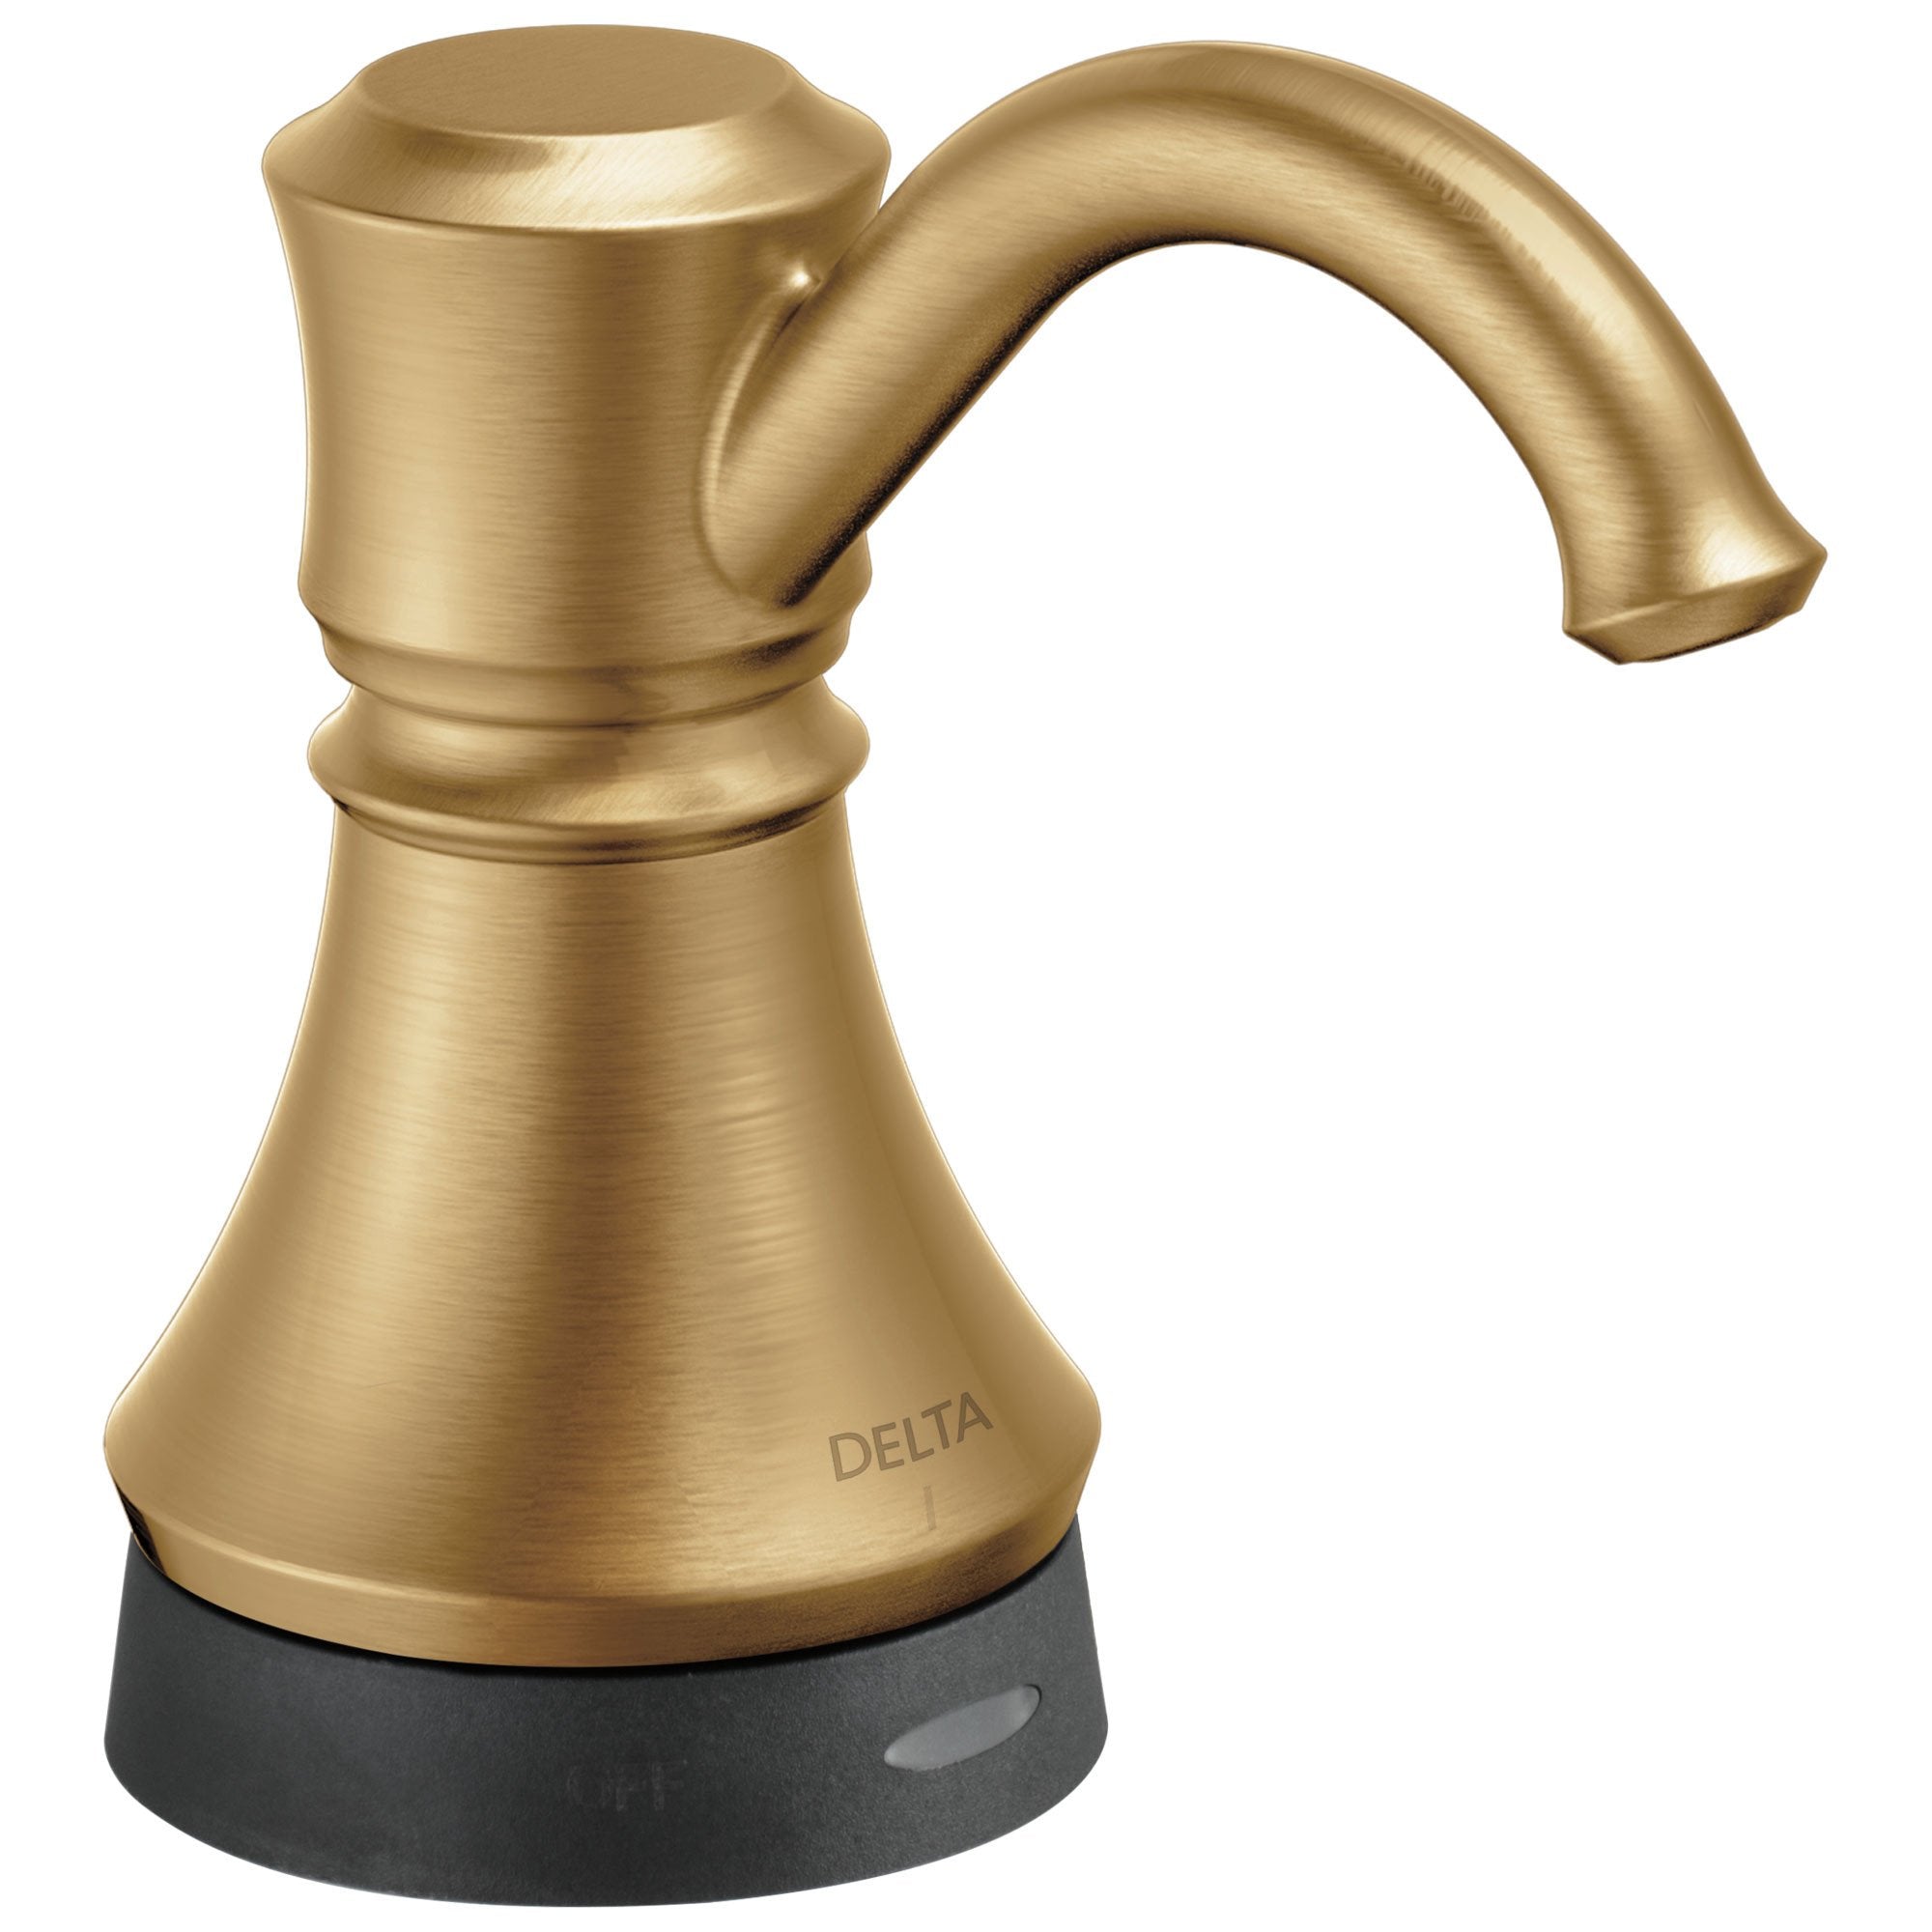 Delta Champagne Bronze Finish Traditional Electronic Deck Mounted Soap Dispenser with Touch2Oxt Technology 732816